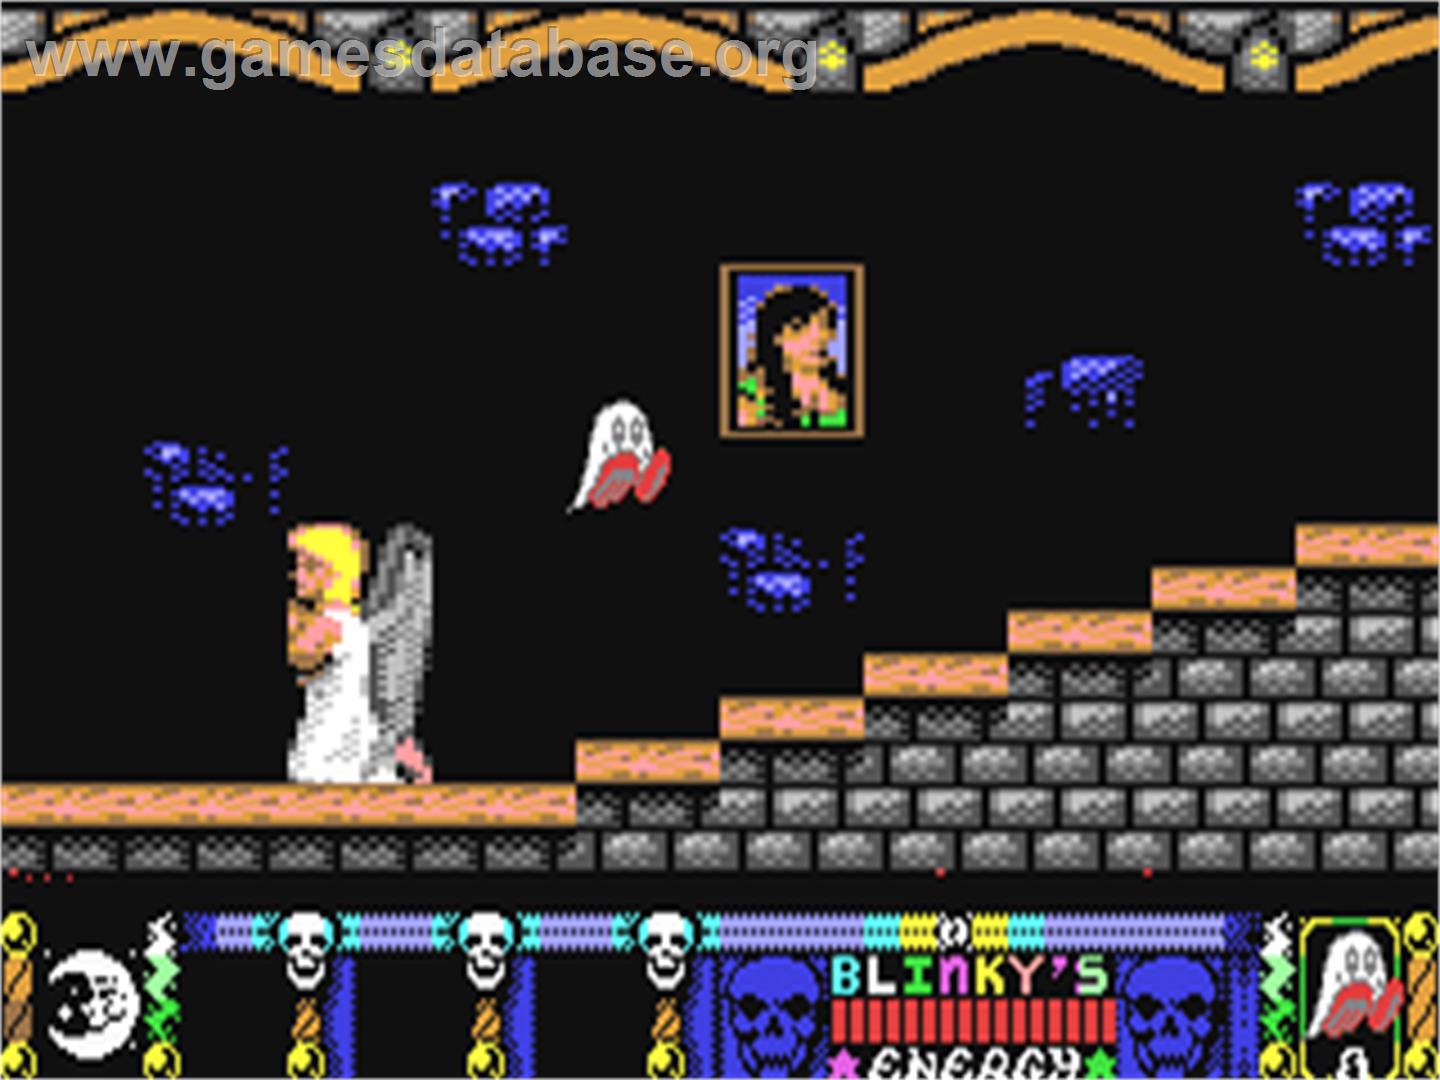 Blinky's Scary School - Commodore 64 - Artwork - In Game